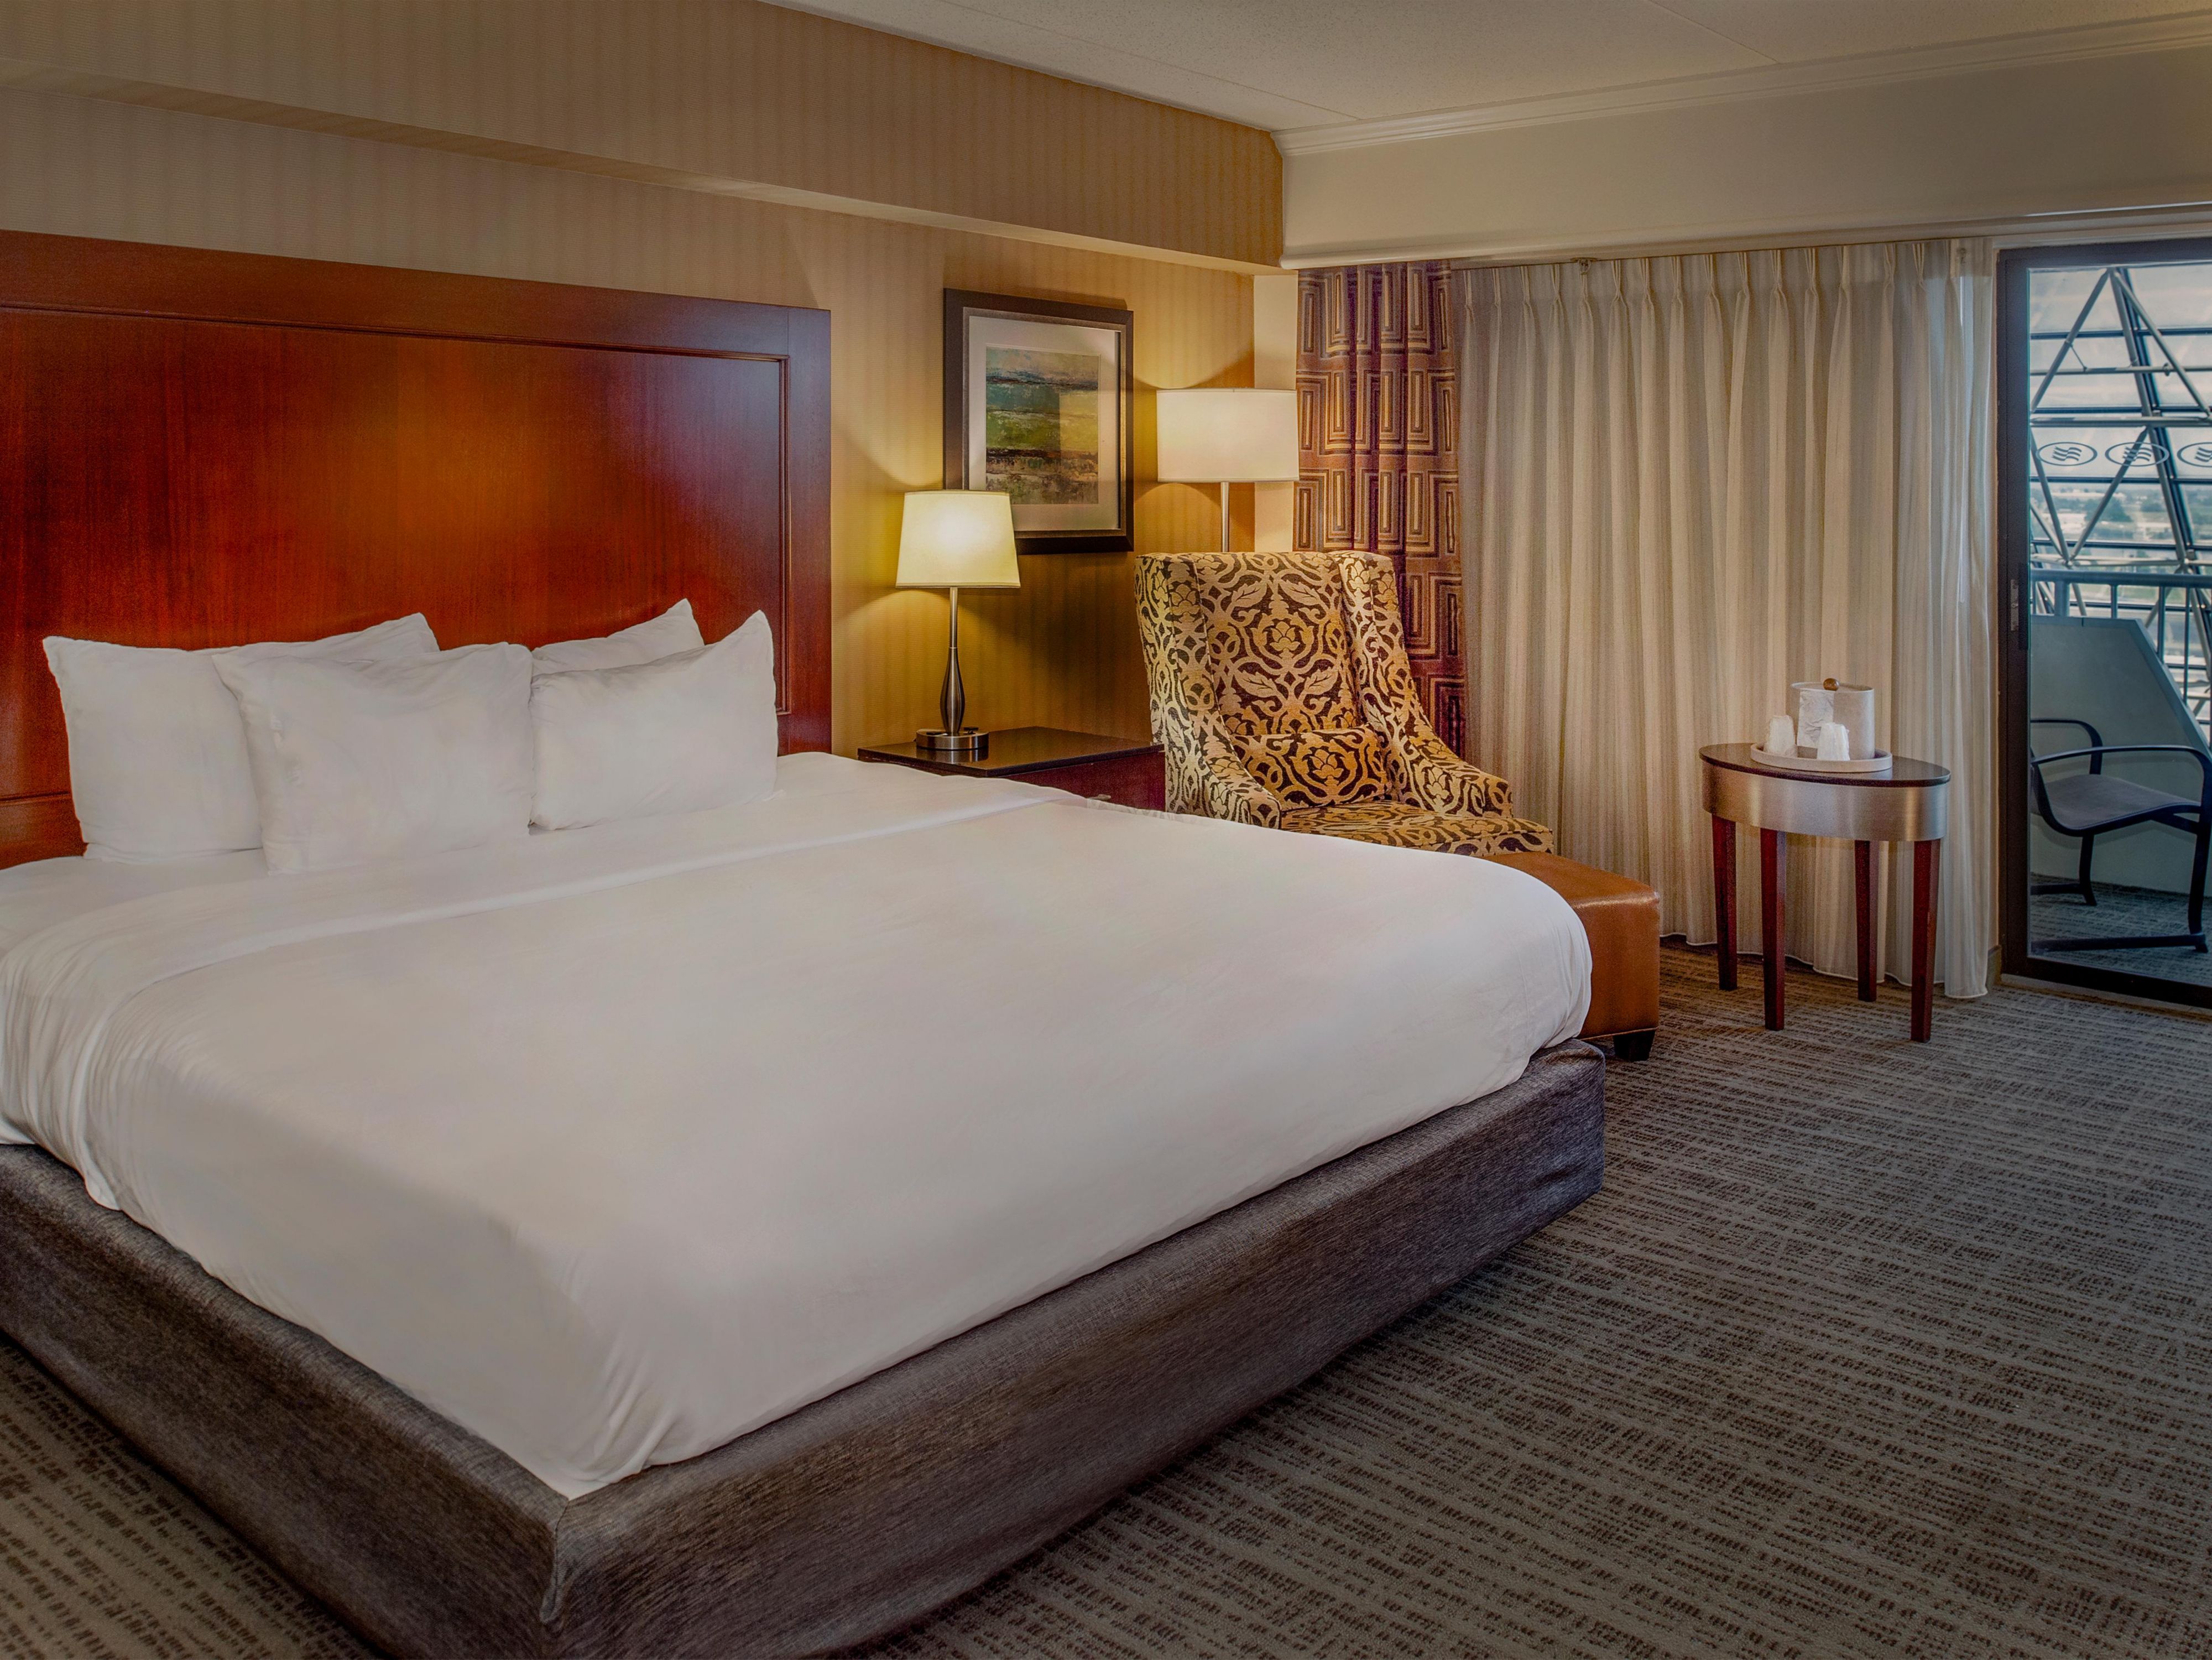 Enjoy your stay in our relaxing and classy Junior suite.